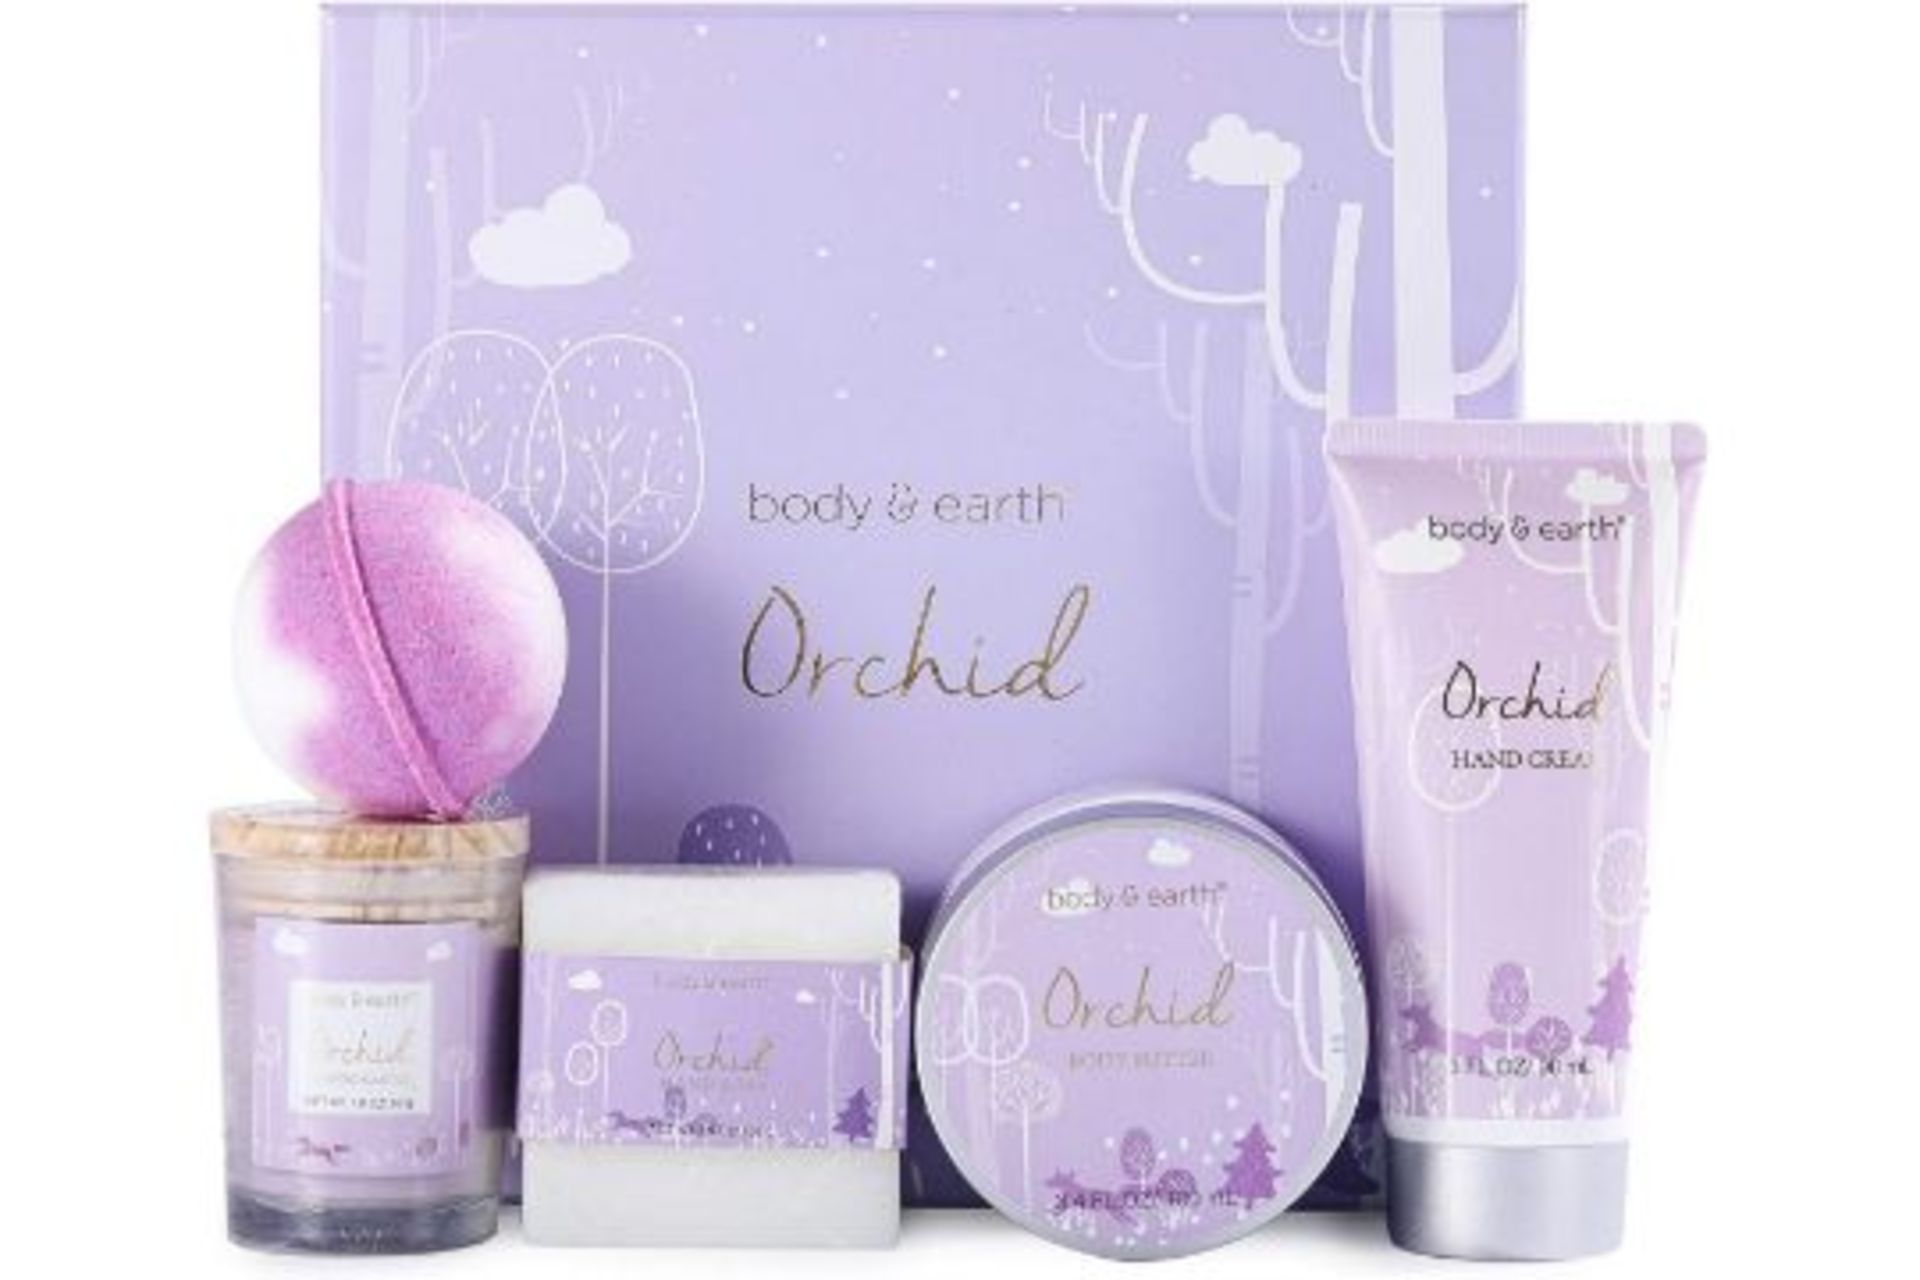 PALLET TO CONTAIN 80 X New Packaged Body & Earth Orchid Bath Gift Set. (BE-BP-043) Orchid Scent: